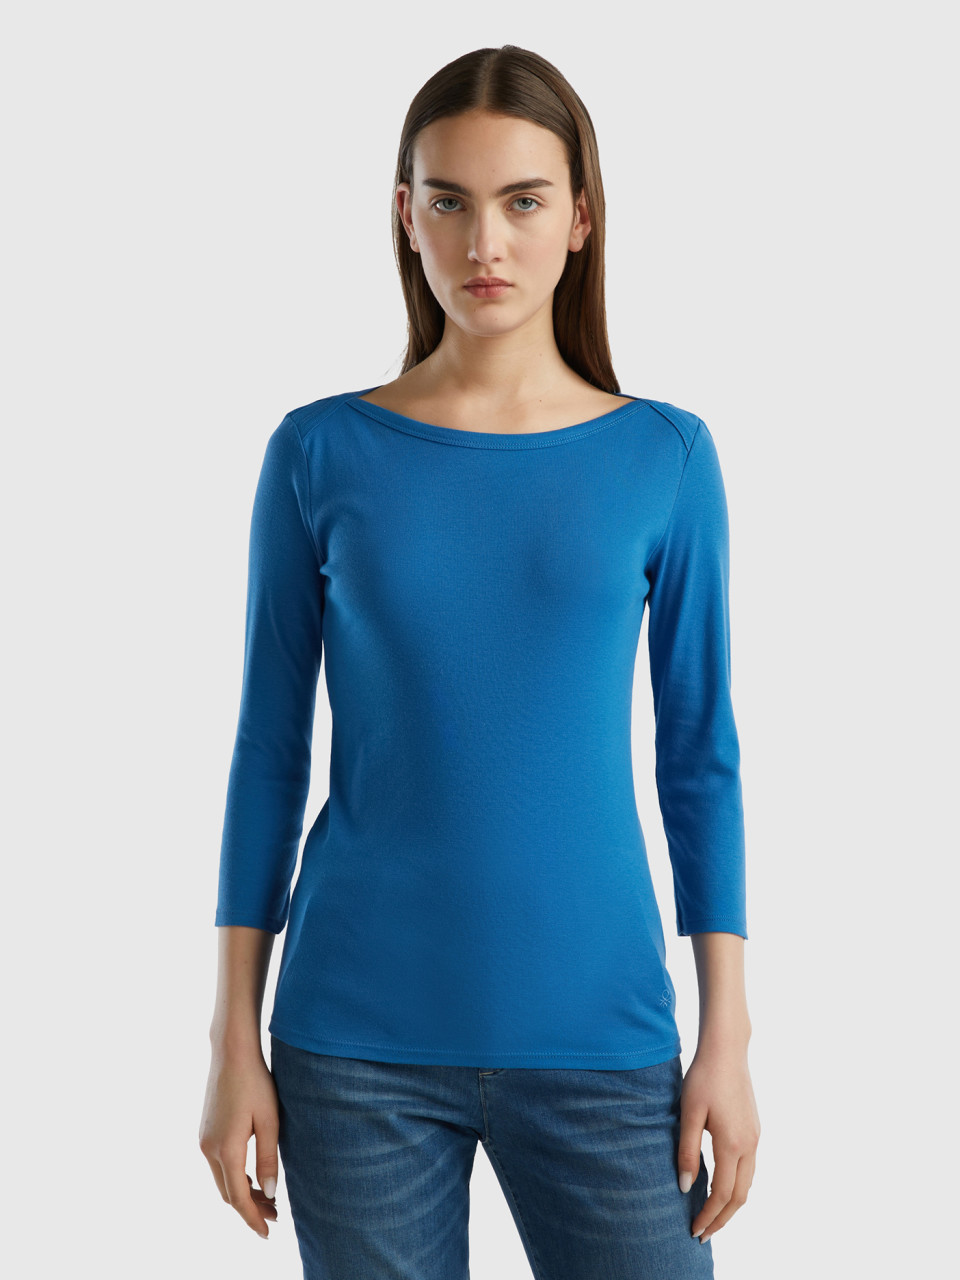 Benetton, T-shirt With Boat Neck In 100% Cotton, Blue, Women